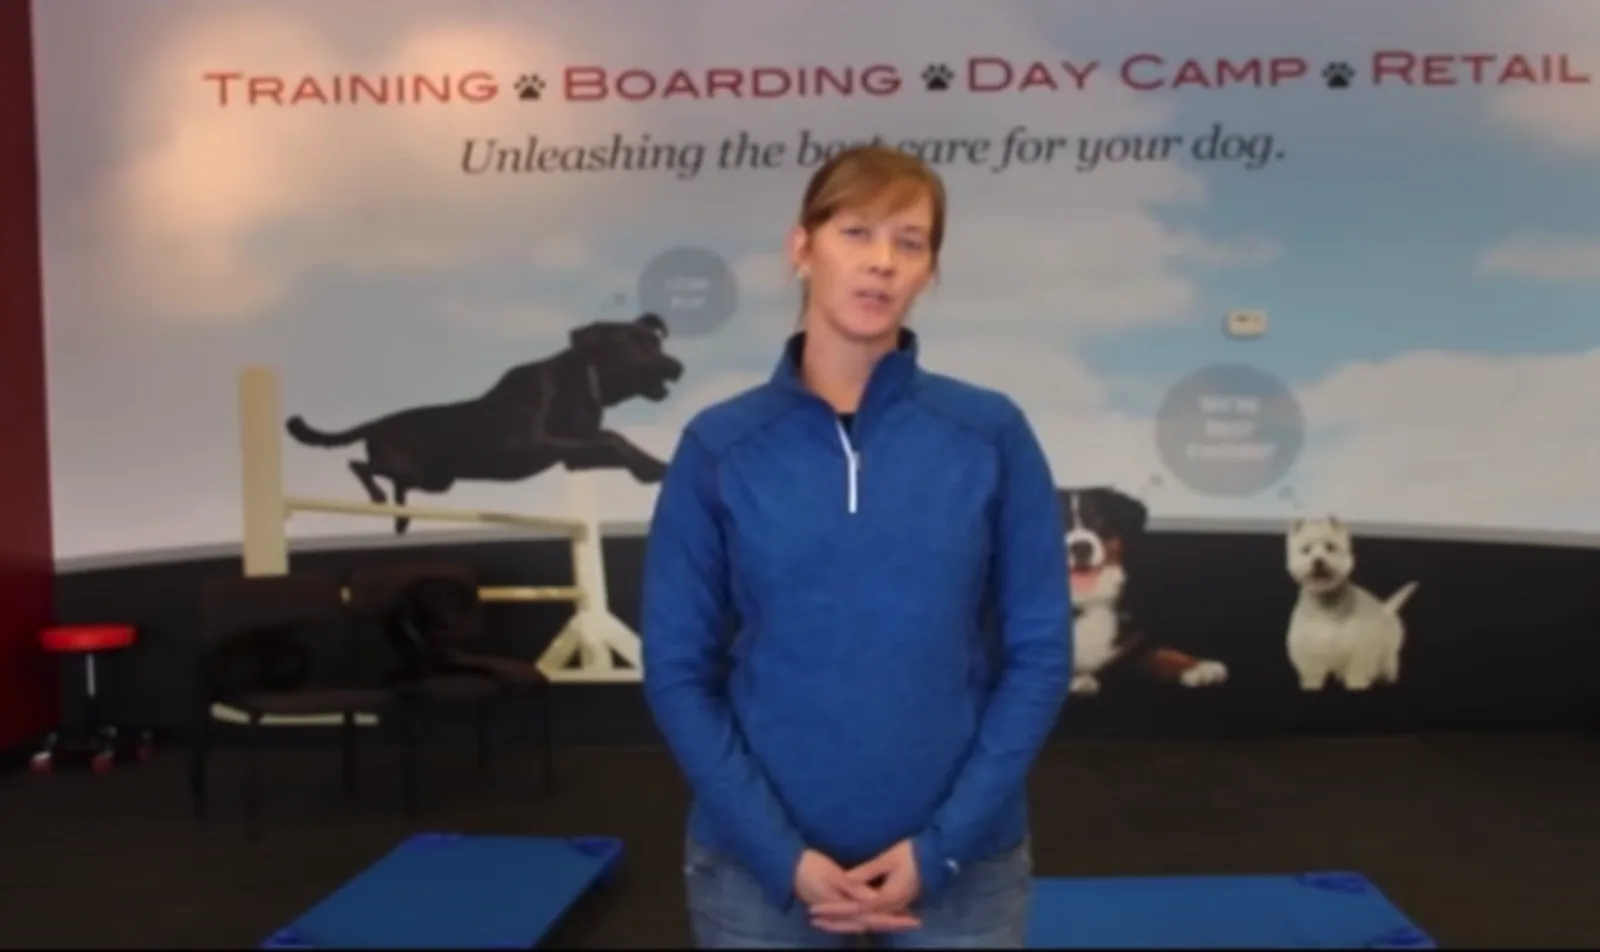 Blonde woman in blue shirt in a dog training facility.